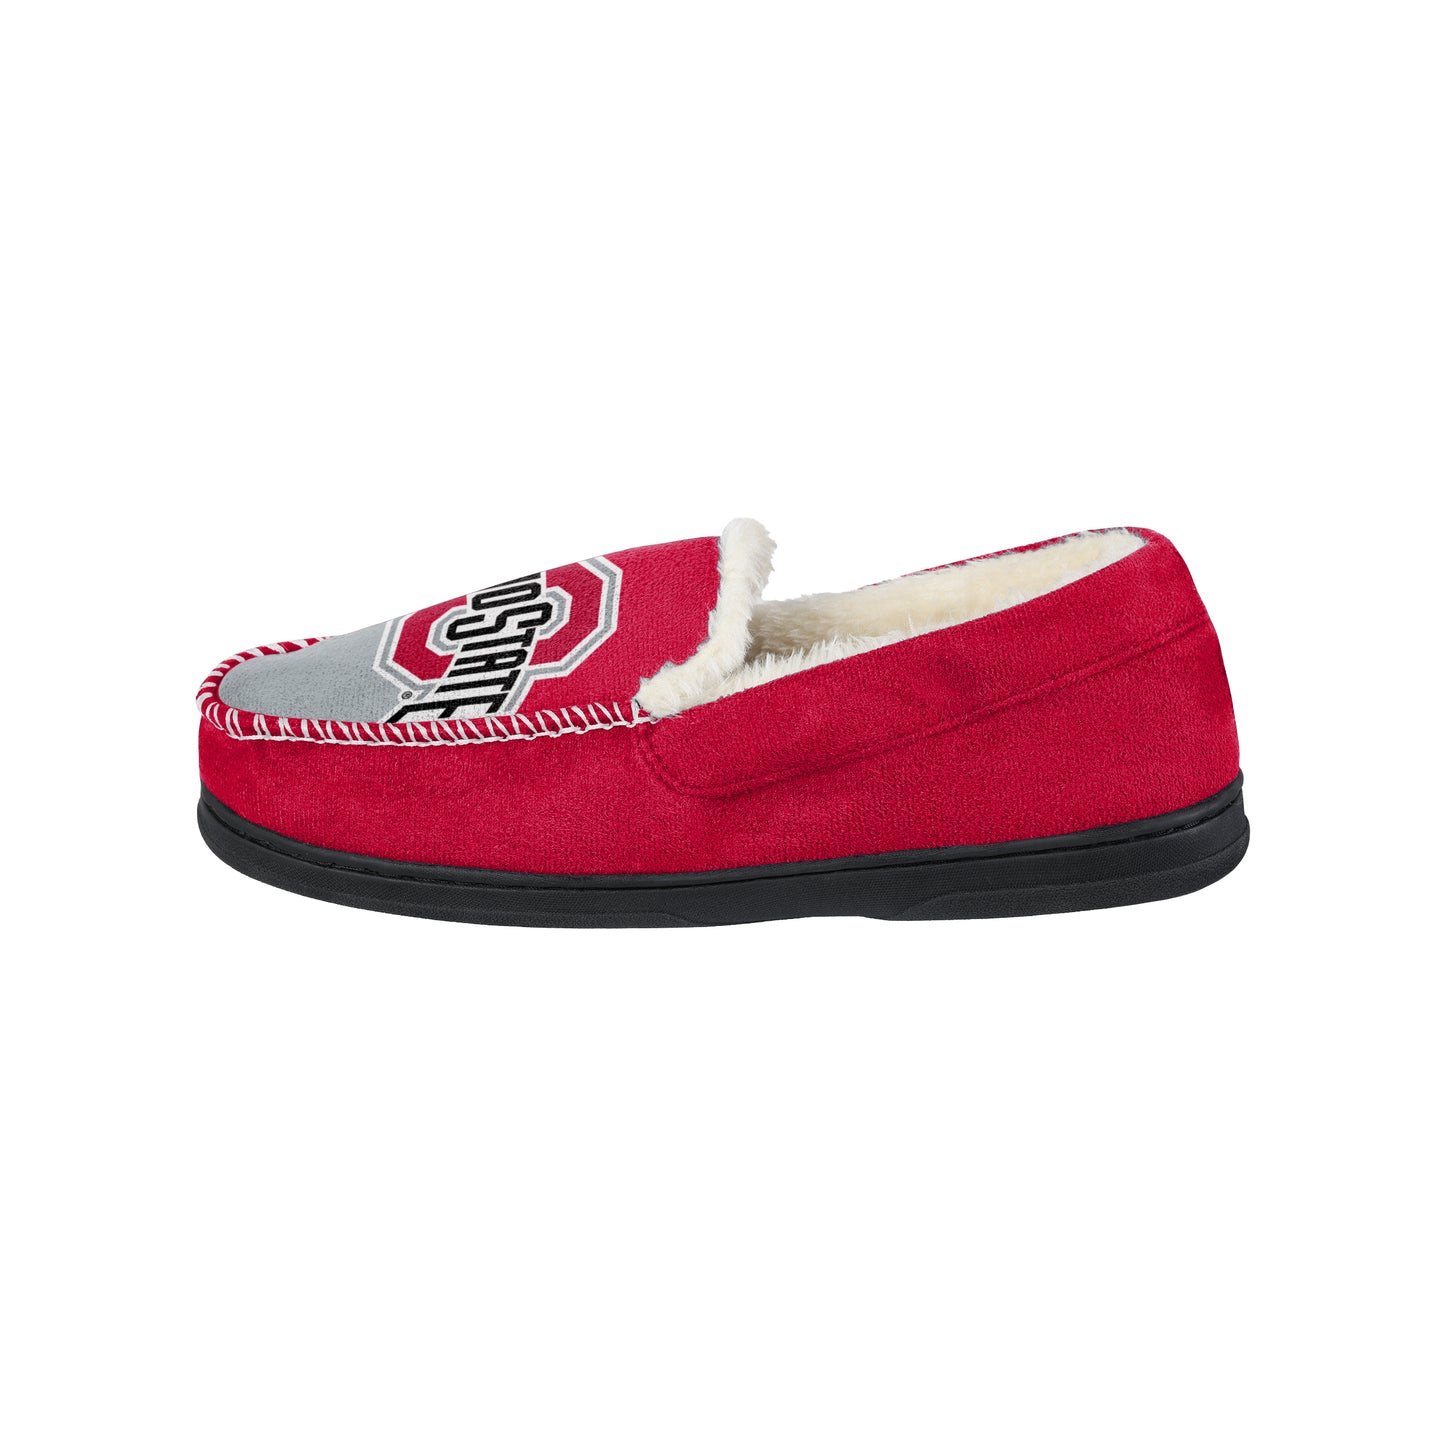 OHIO STATE BUCKEYES MEN'S COLOR BLOCK MOCCASINS